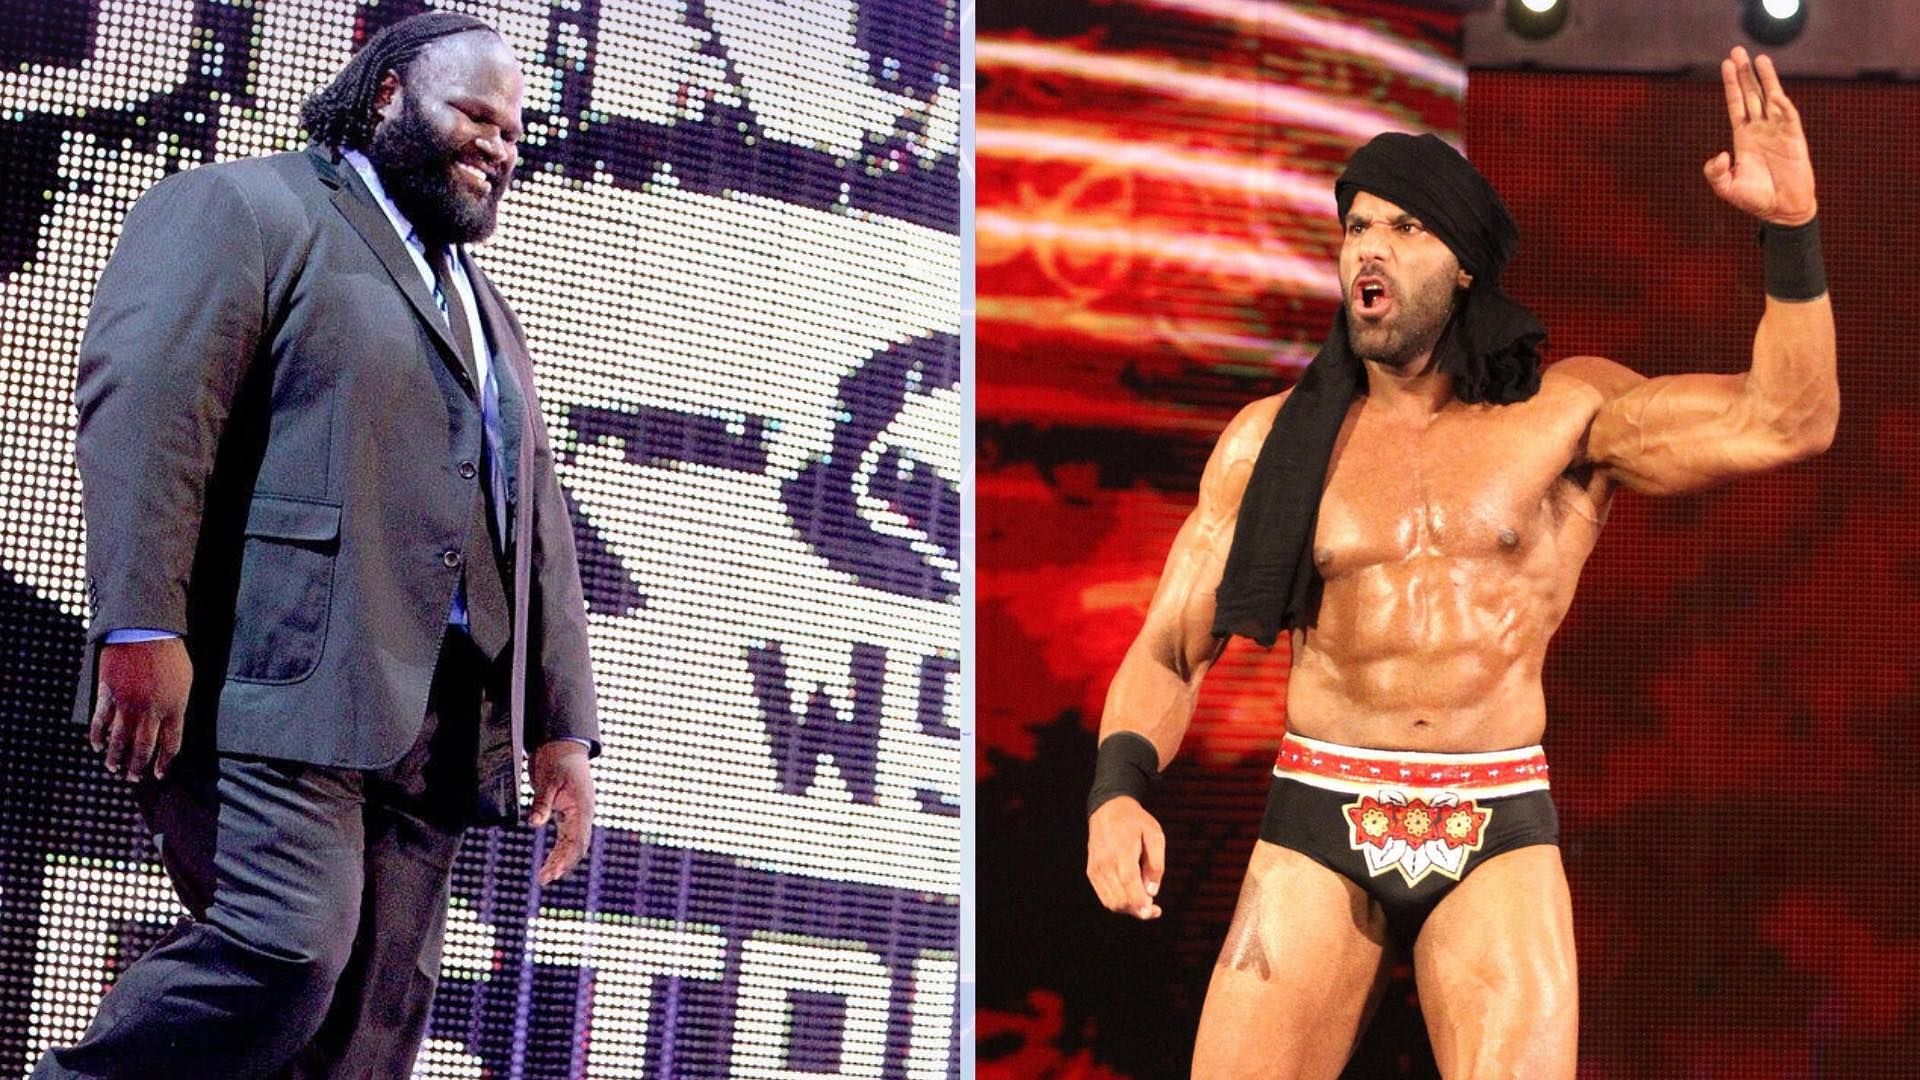 Jinder Mahal was released from WWE recently